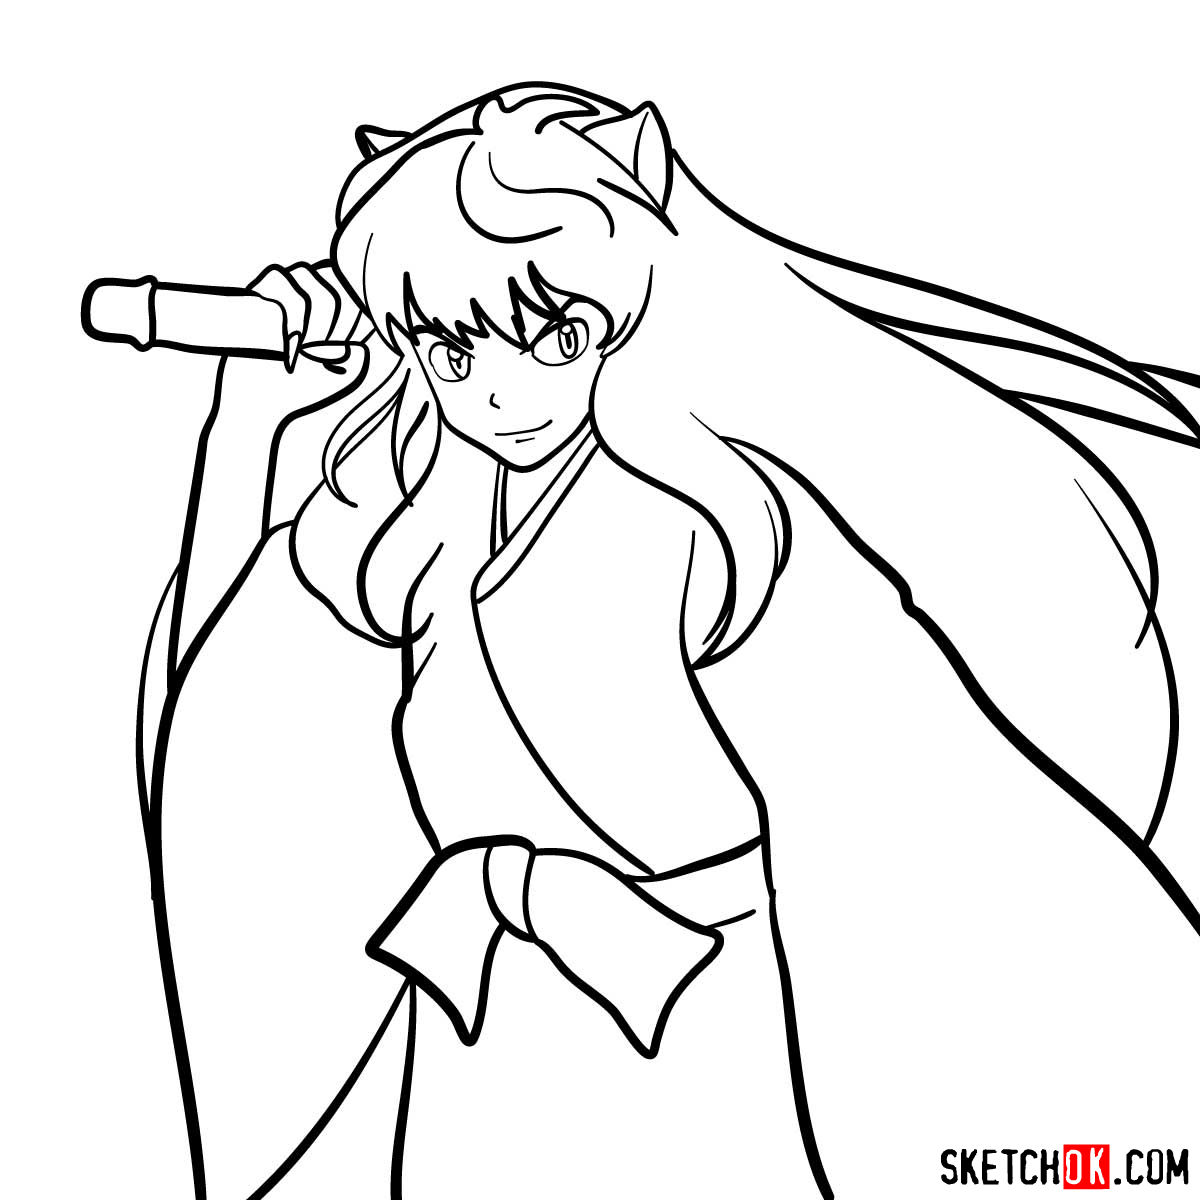 I draw therefore I am — Inuyasha sketches